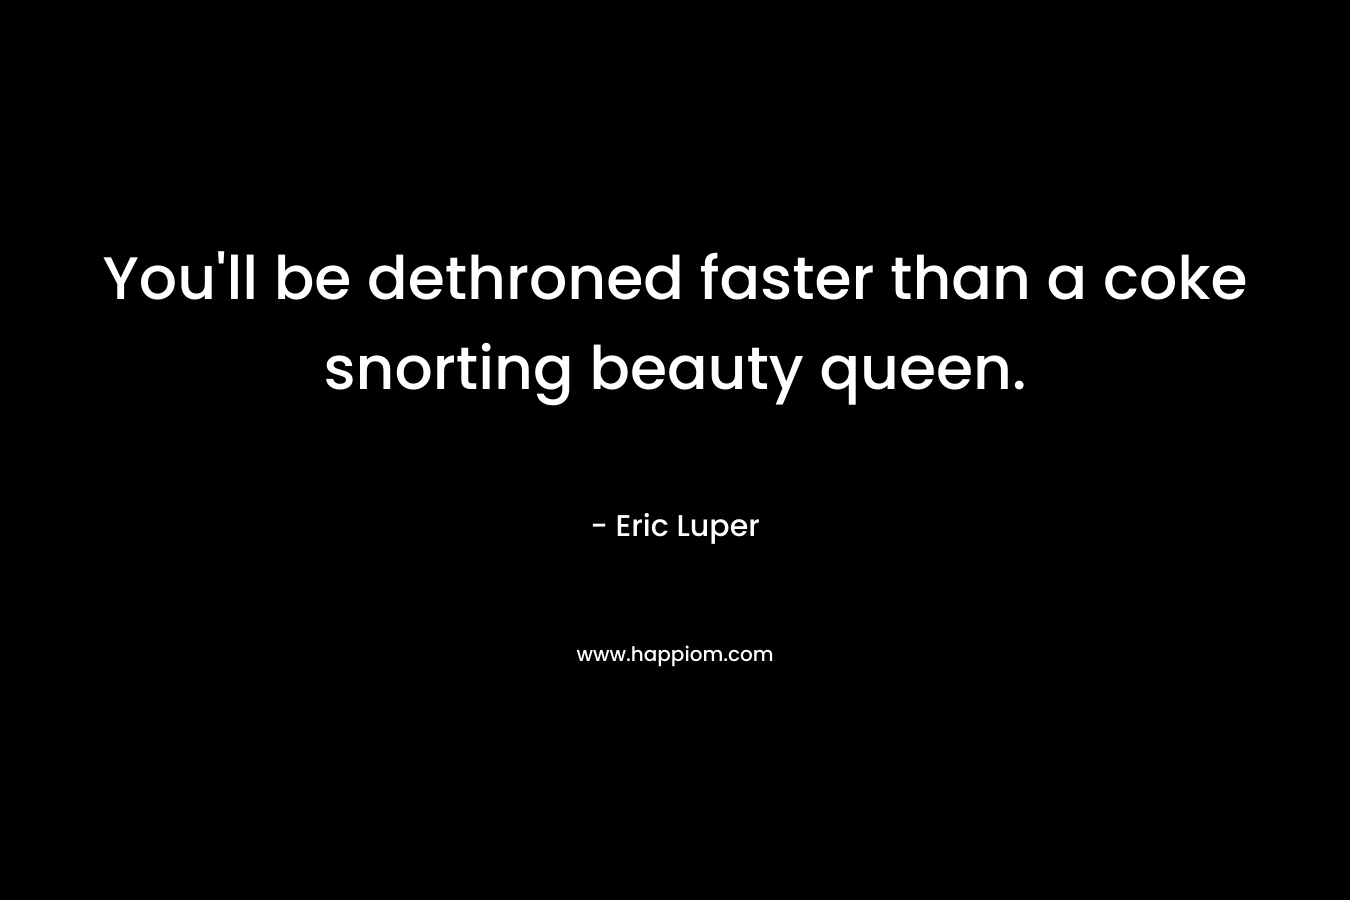 You'll be dethroned faster than a coke snorting beauty queen.